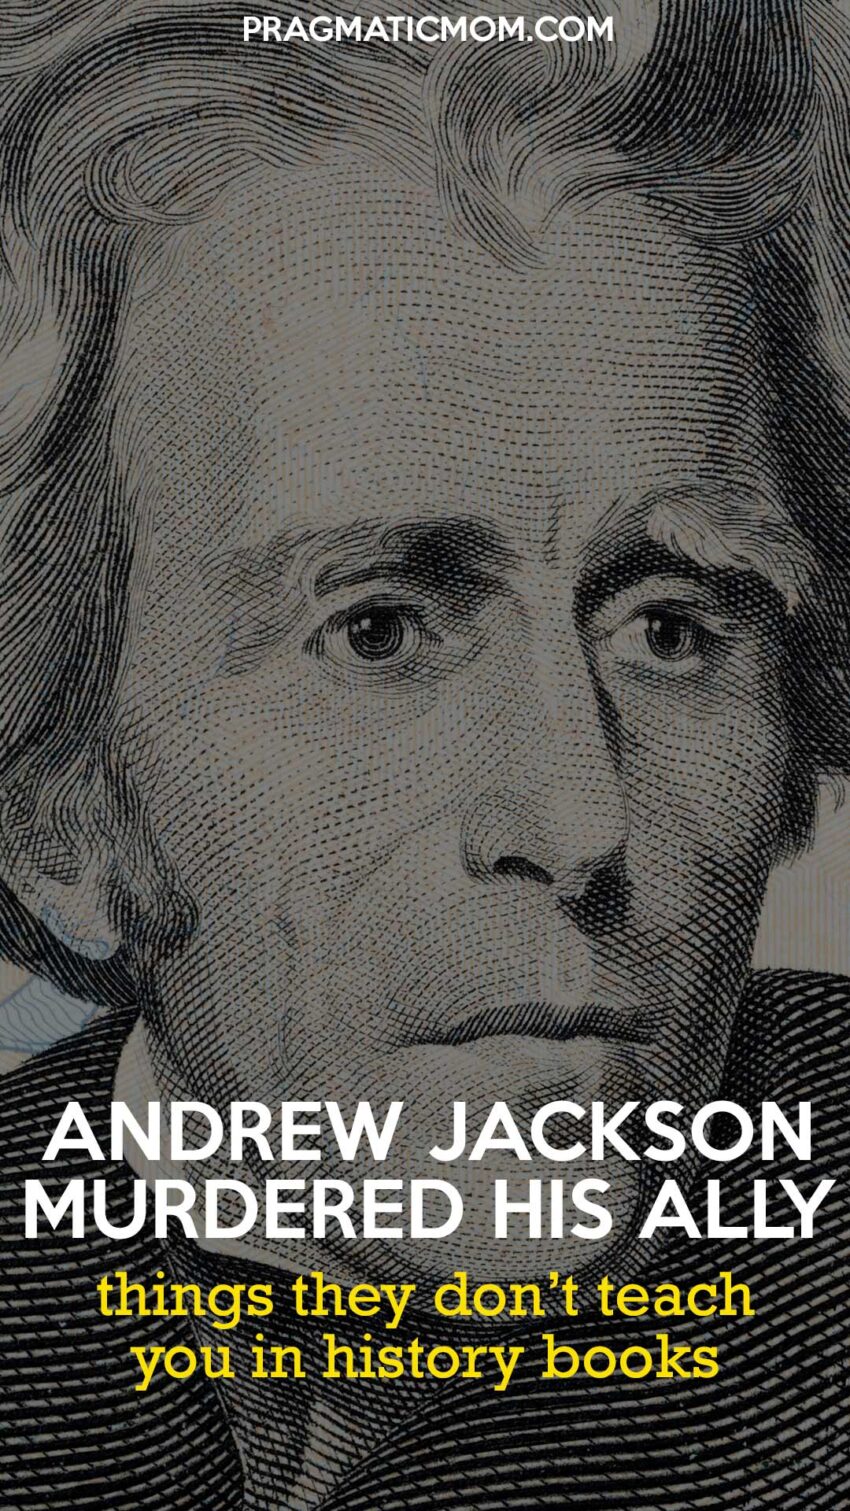 Andrew Jackson Murdered His Ally: Things They Don't Teach You in History Books